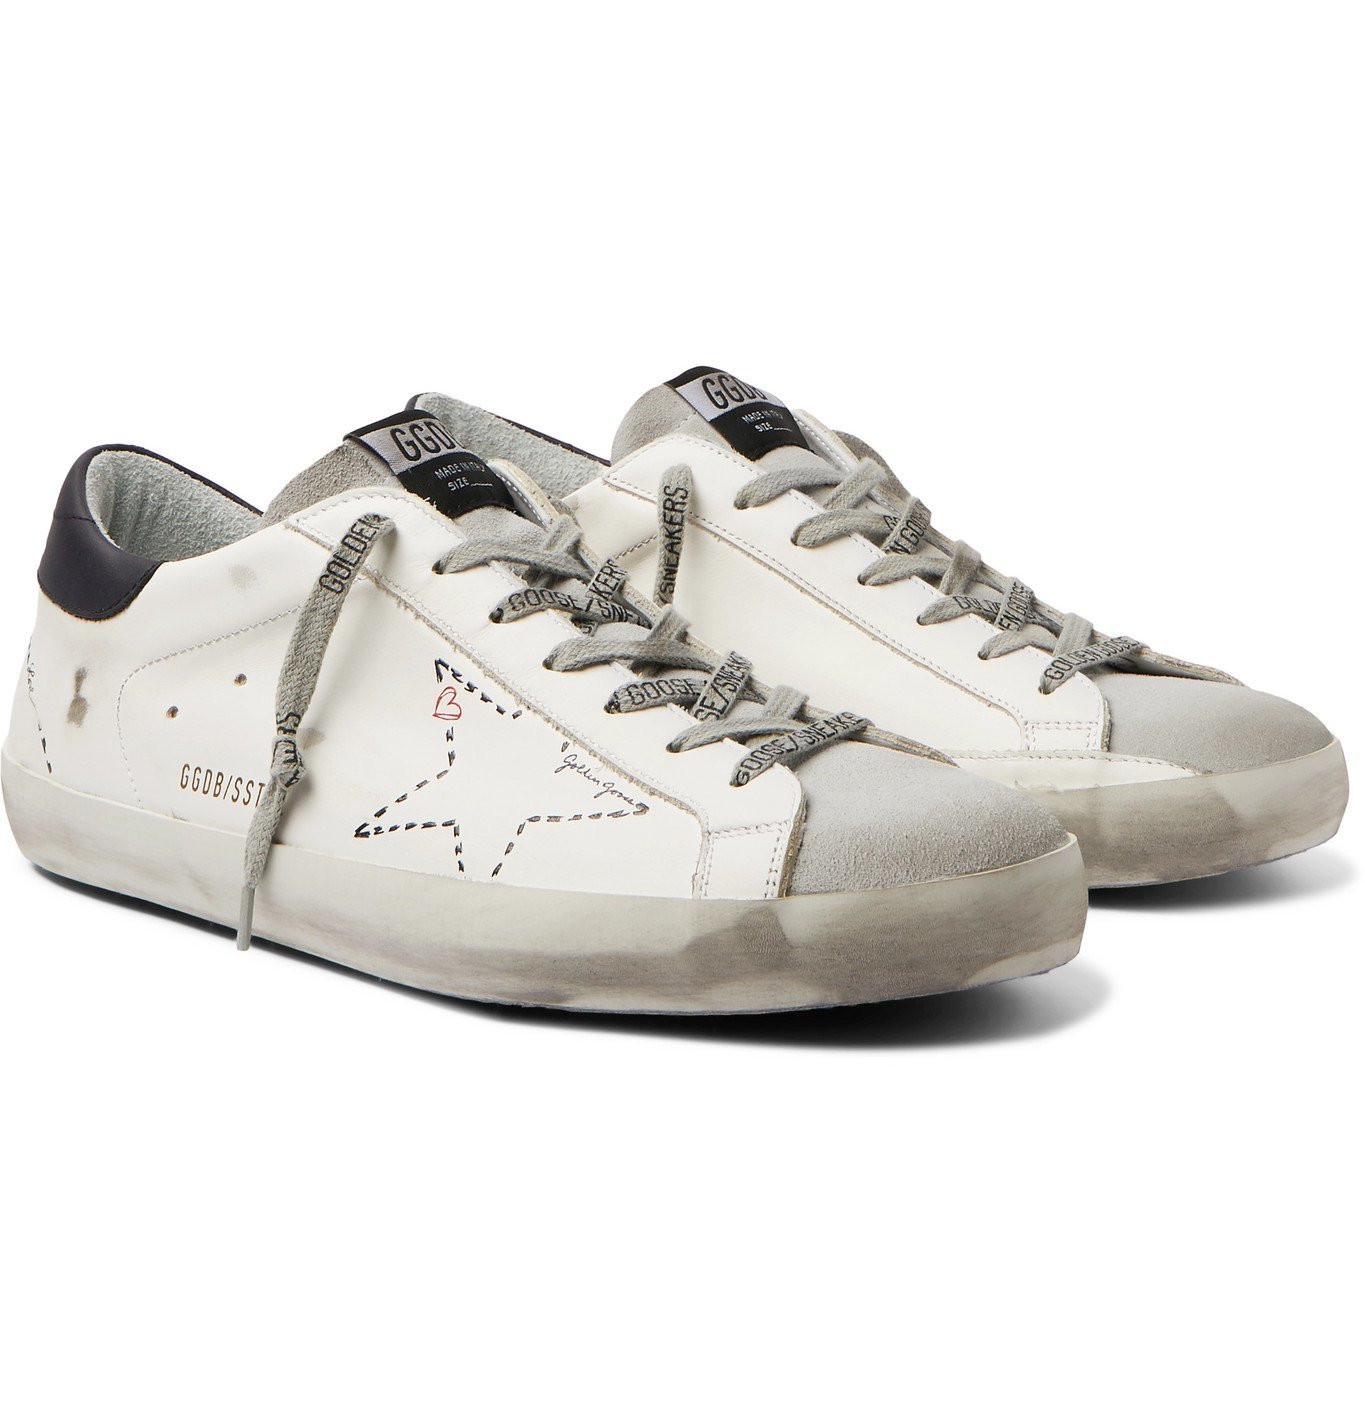 - Distressed Leather and Suede Sneakers - White Goose Deluxe Brand